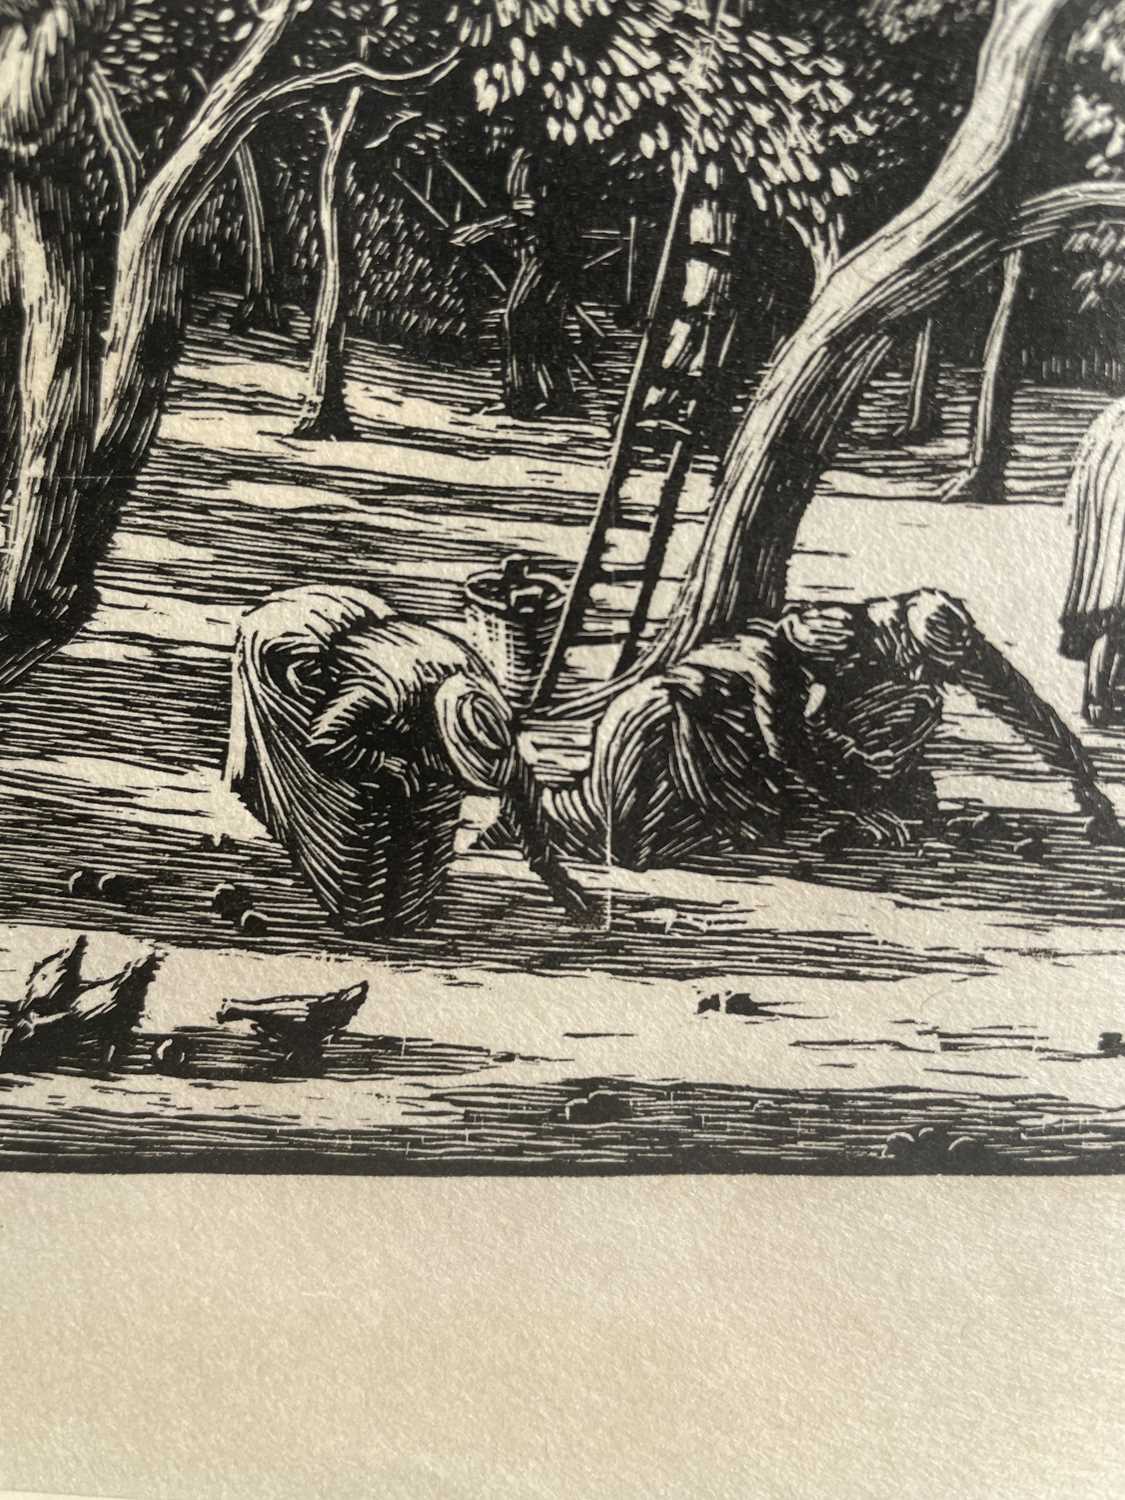 Gwen Raverat (1855-1957) "Apple Pickers" Wood engraving, together with a further wood engraving by - Image 14 of 14